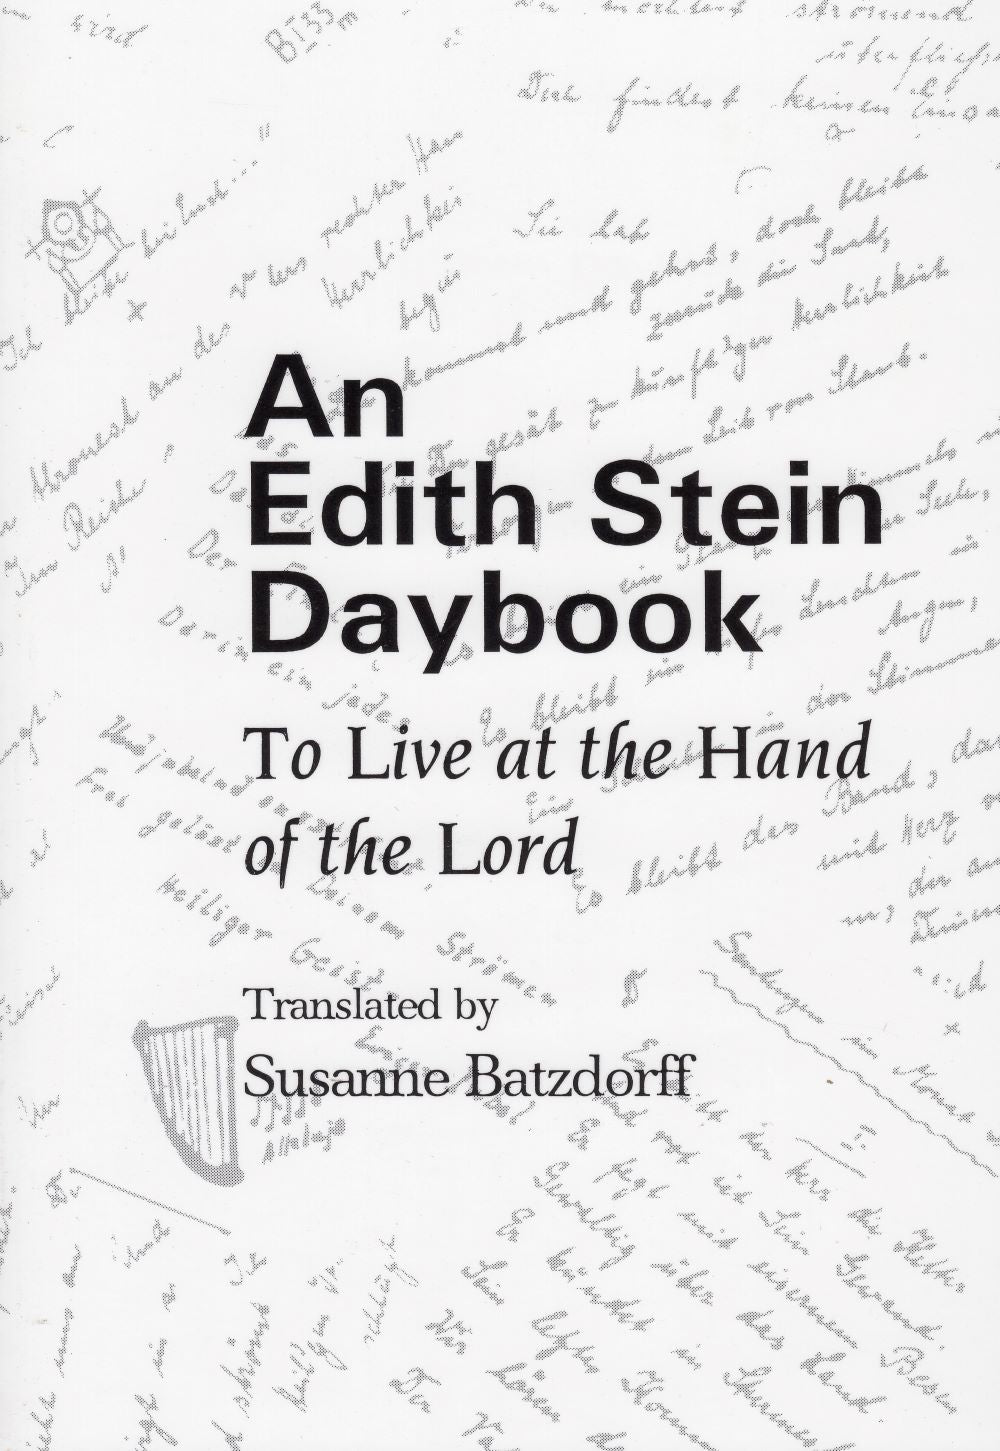 AN EDITH STEIN DAYBOOK: To Live at the Hand of the Lord.